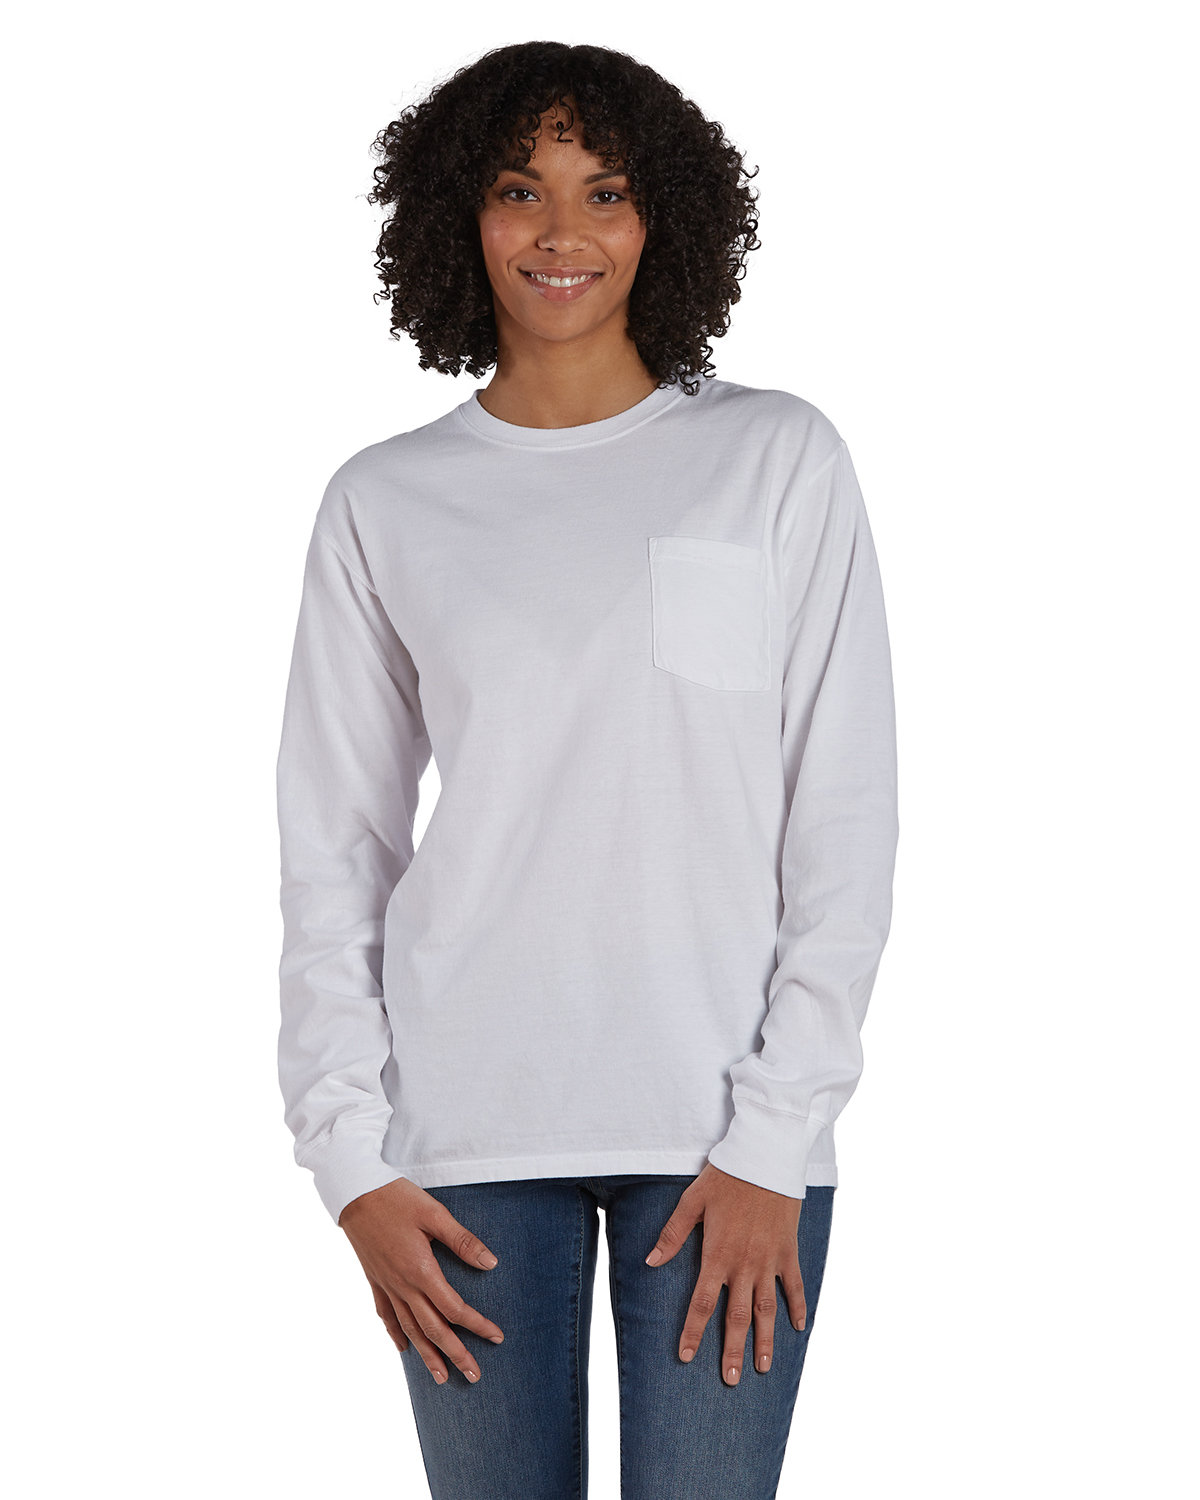 Unisex Garment-Dyed Long-Sleeve T-Shirt With Pocket-ComfortWash by Hanes